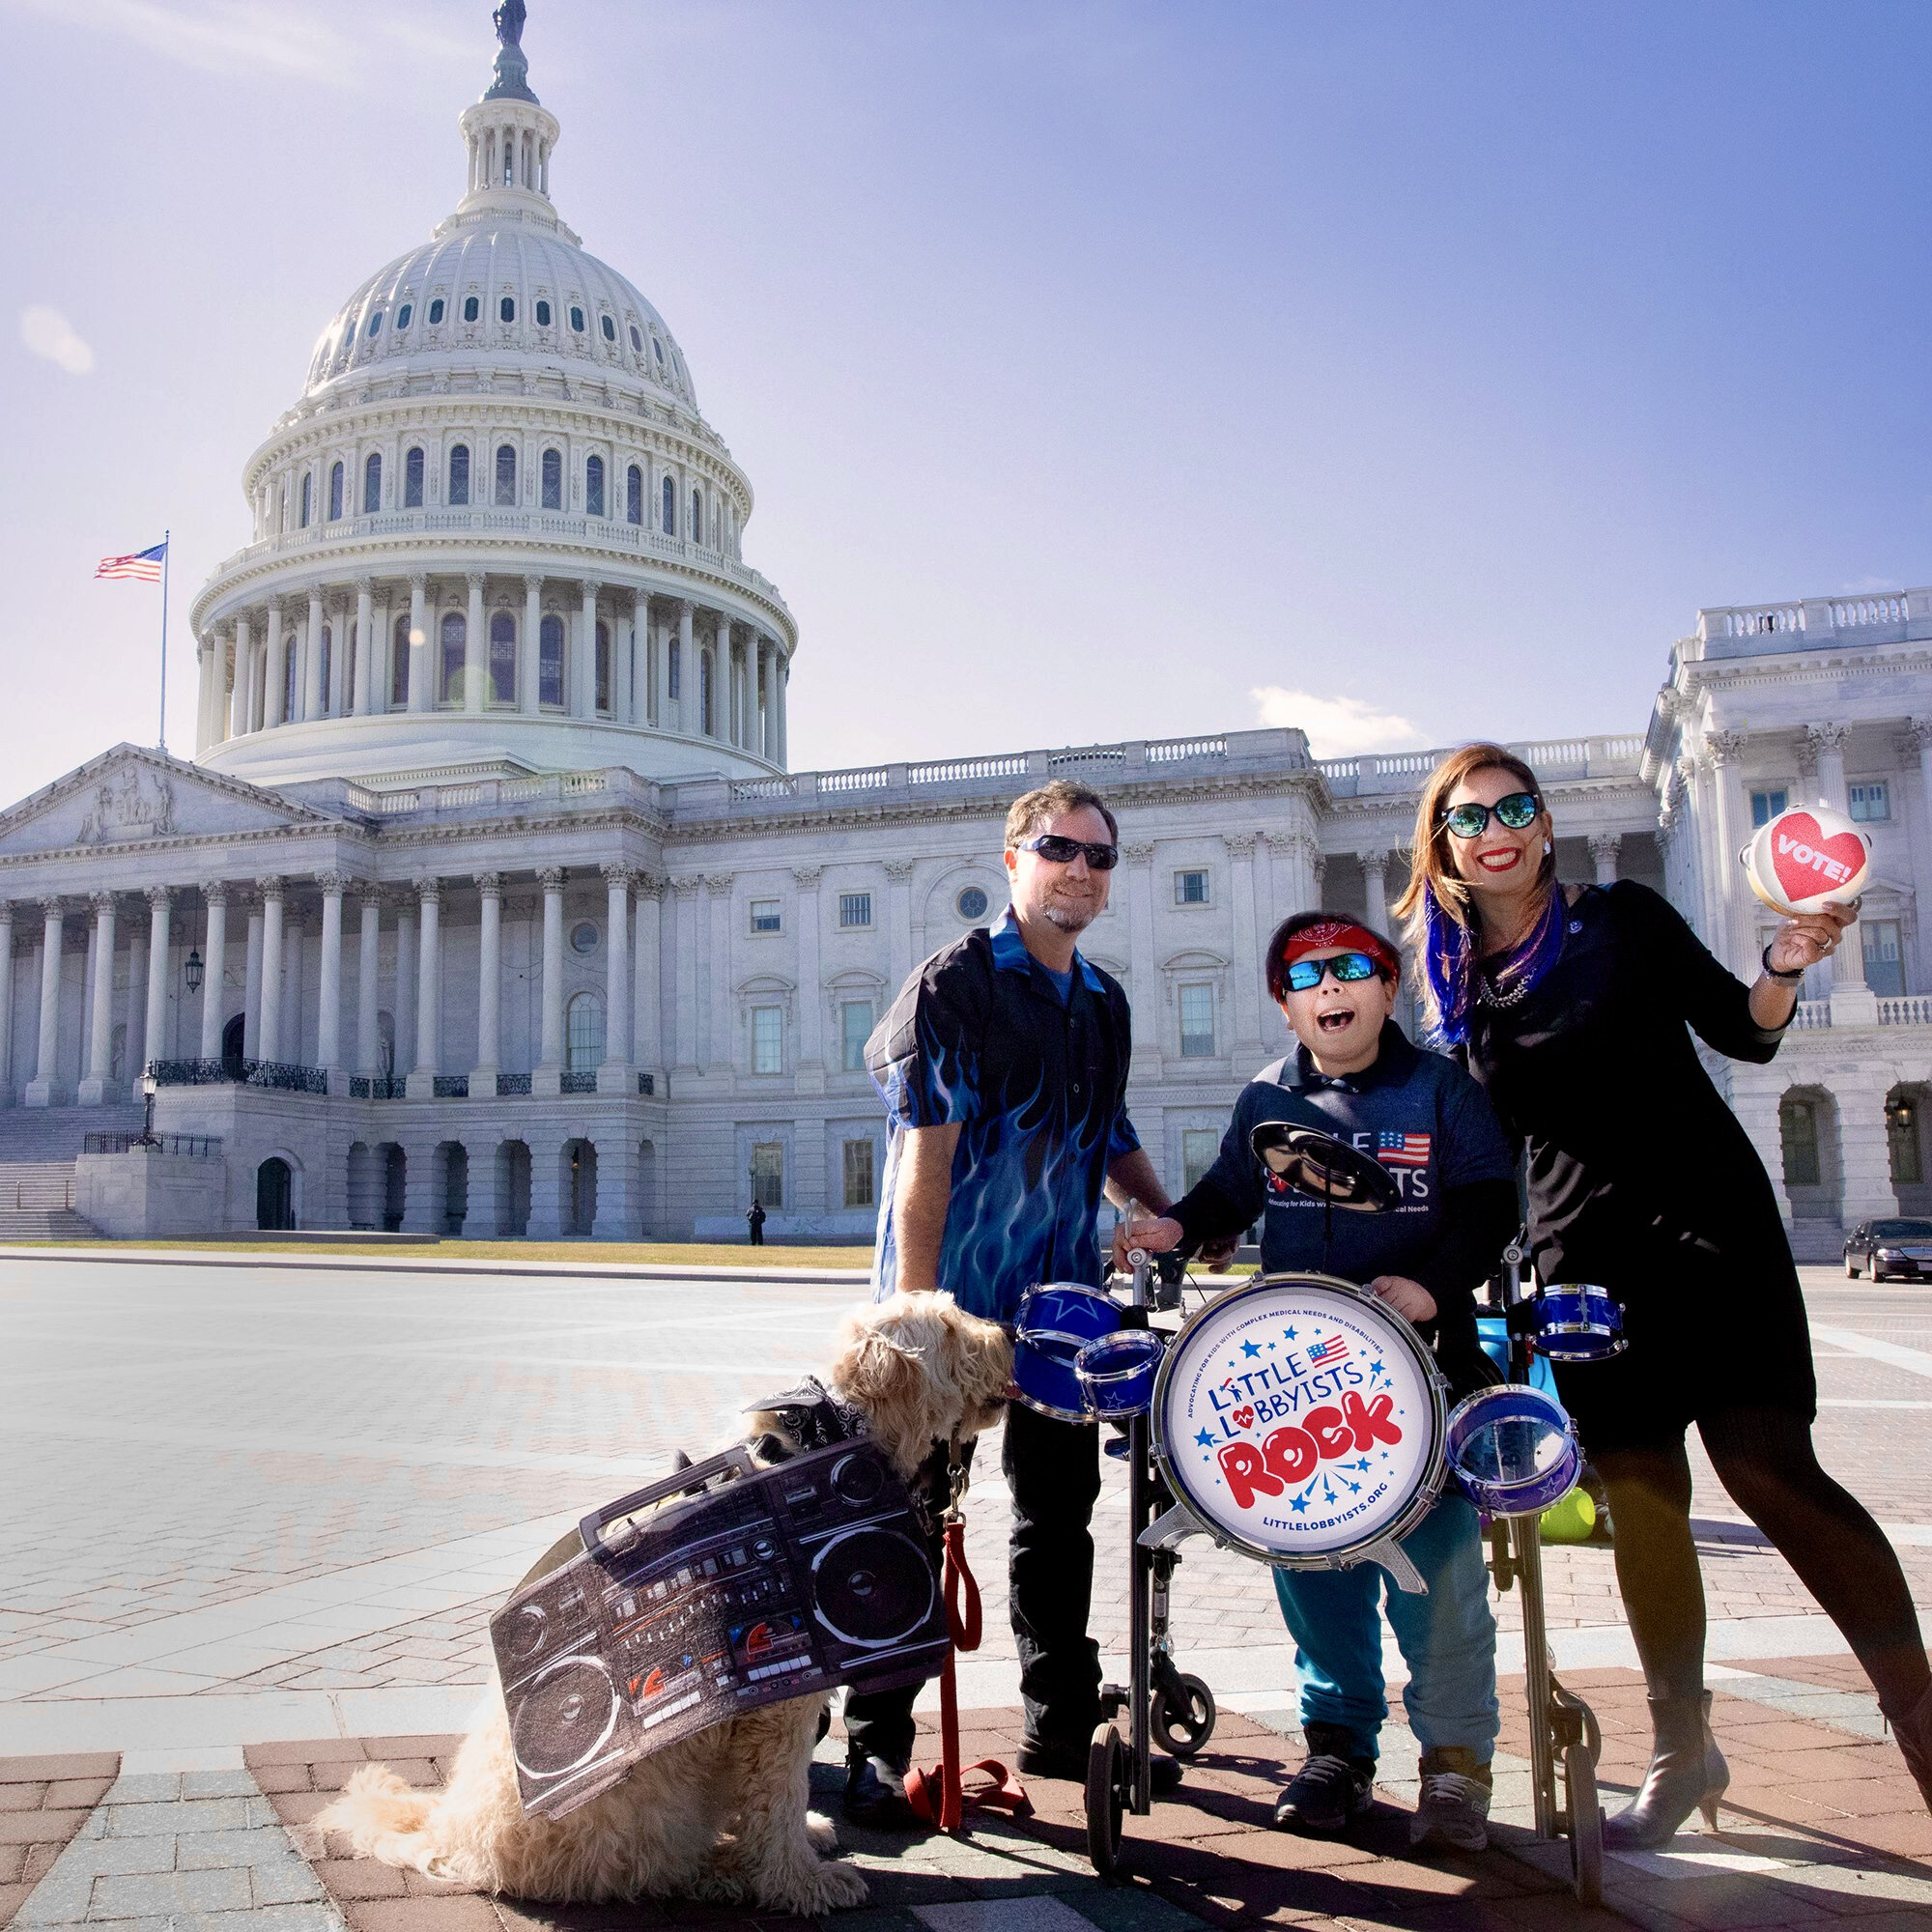  A Little Lobbyists family poses in front of the U.S. Capitol, accompanied by a dog and a drum set. 